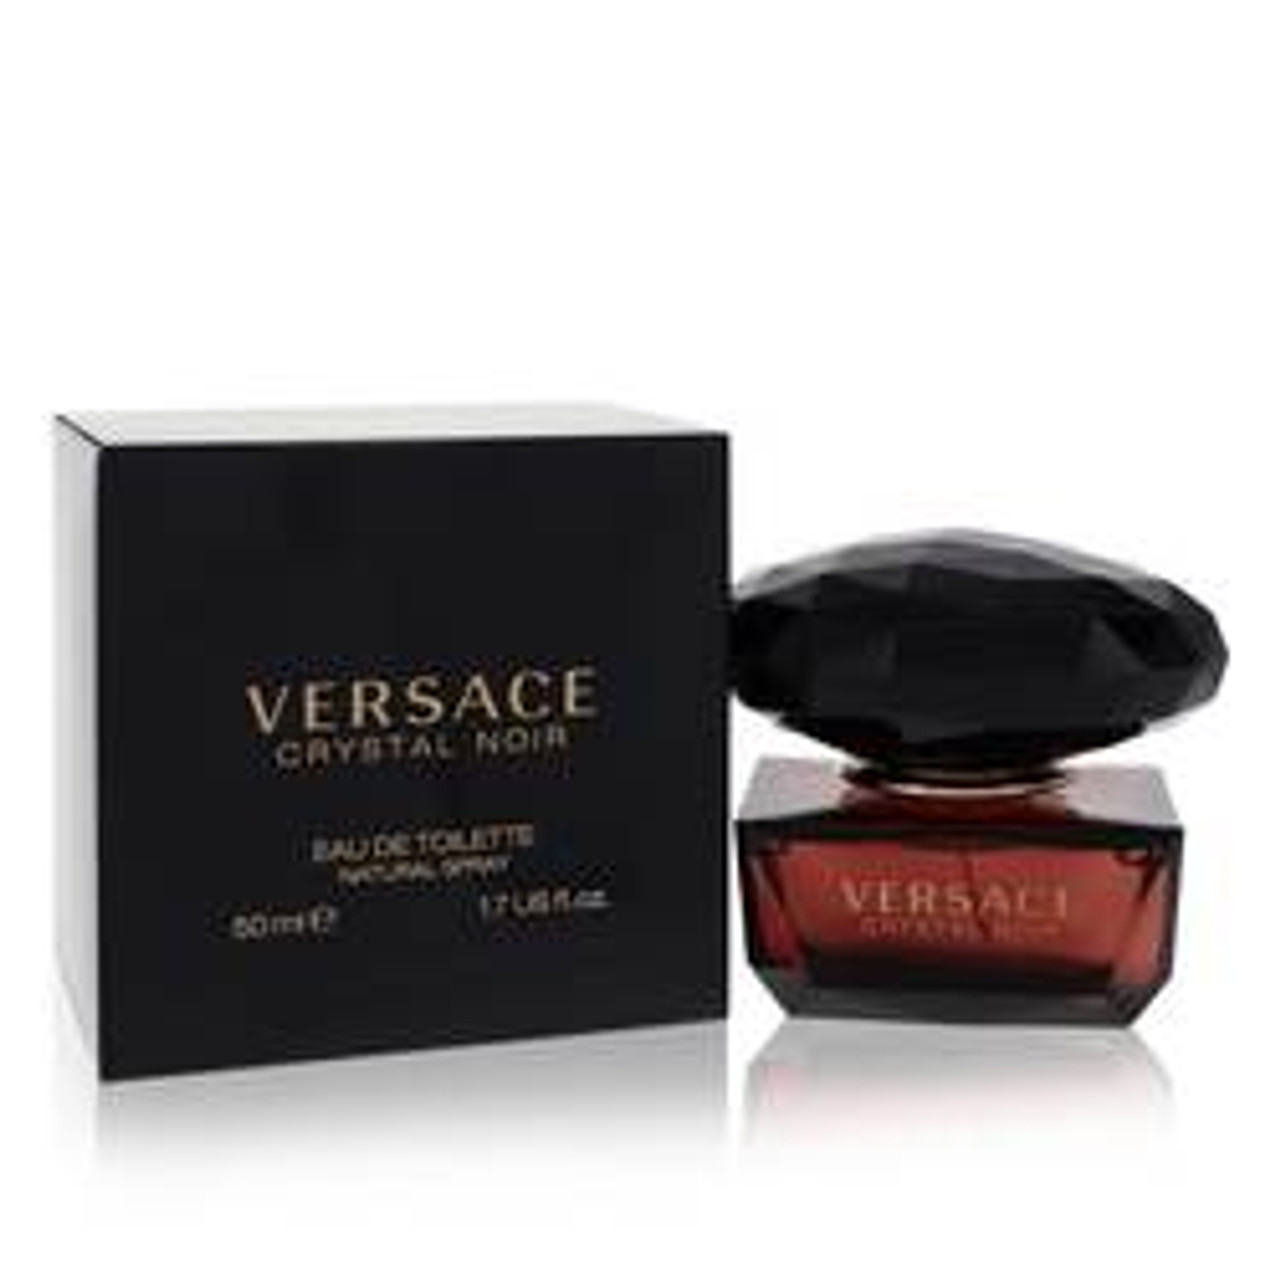 Crystal Noir Perfume By Versace Eau De Toilette Spray 1.7 oz for Women - [From 124.00 - Choose pk Qty ] - *Ships from Miami